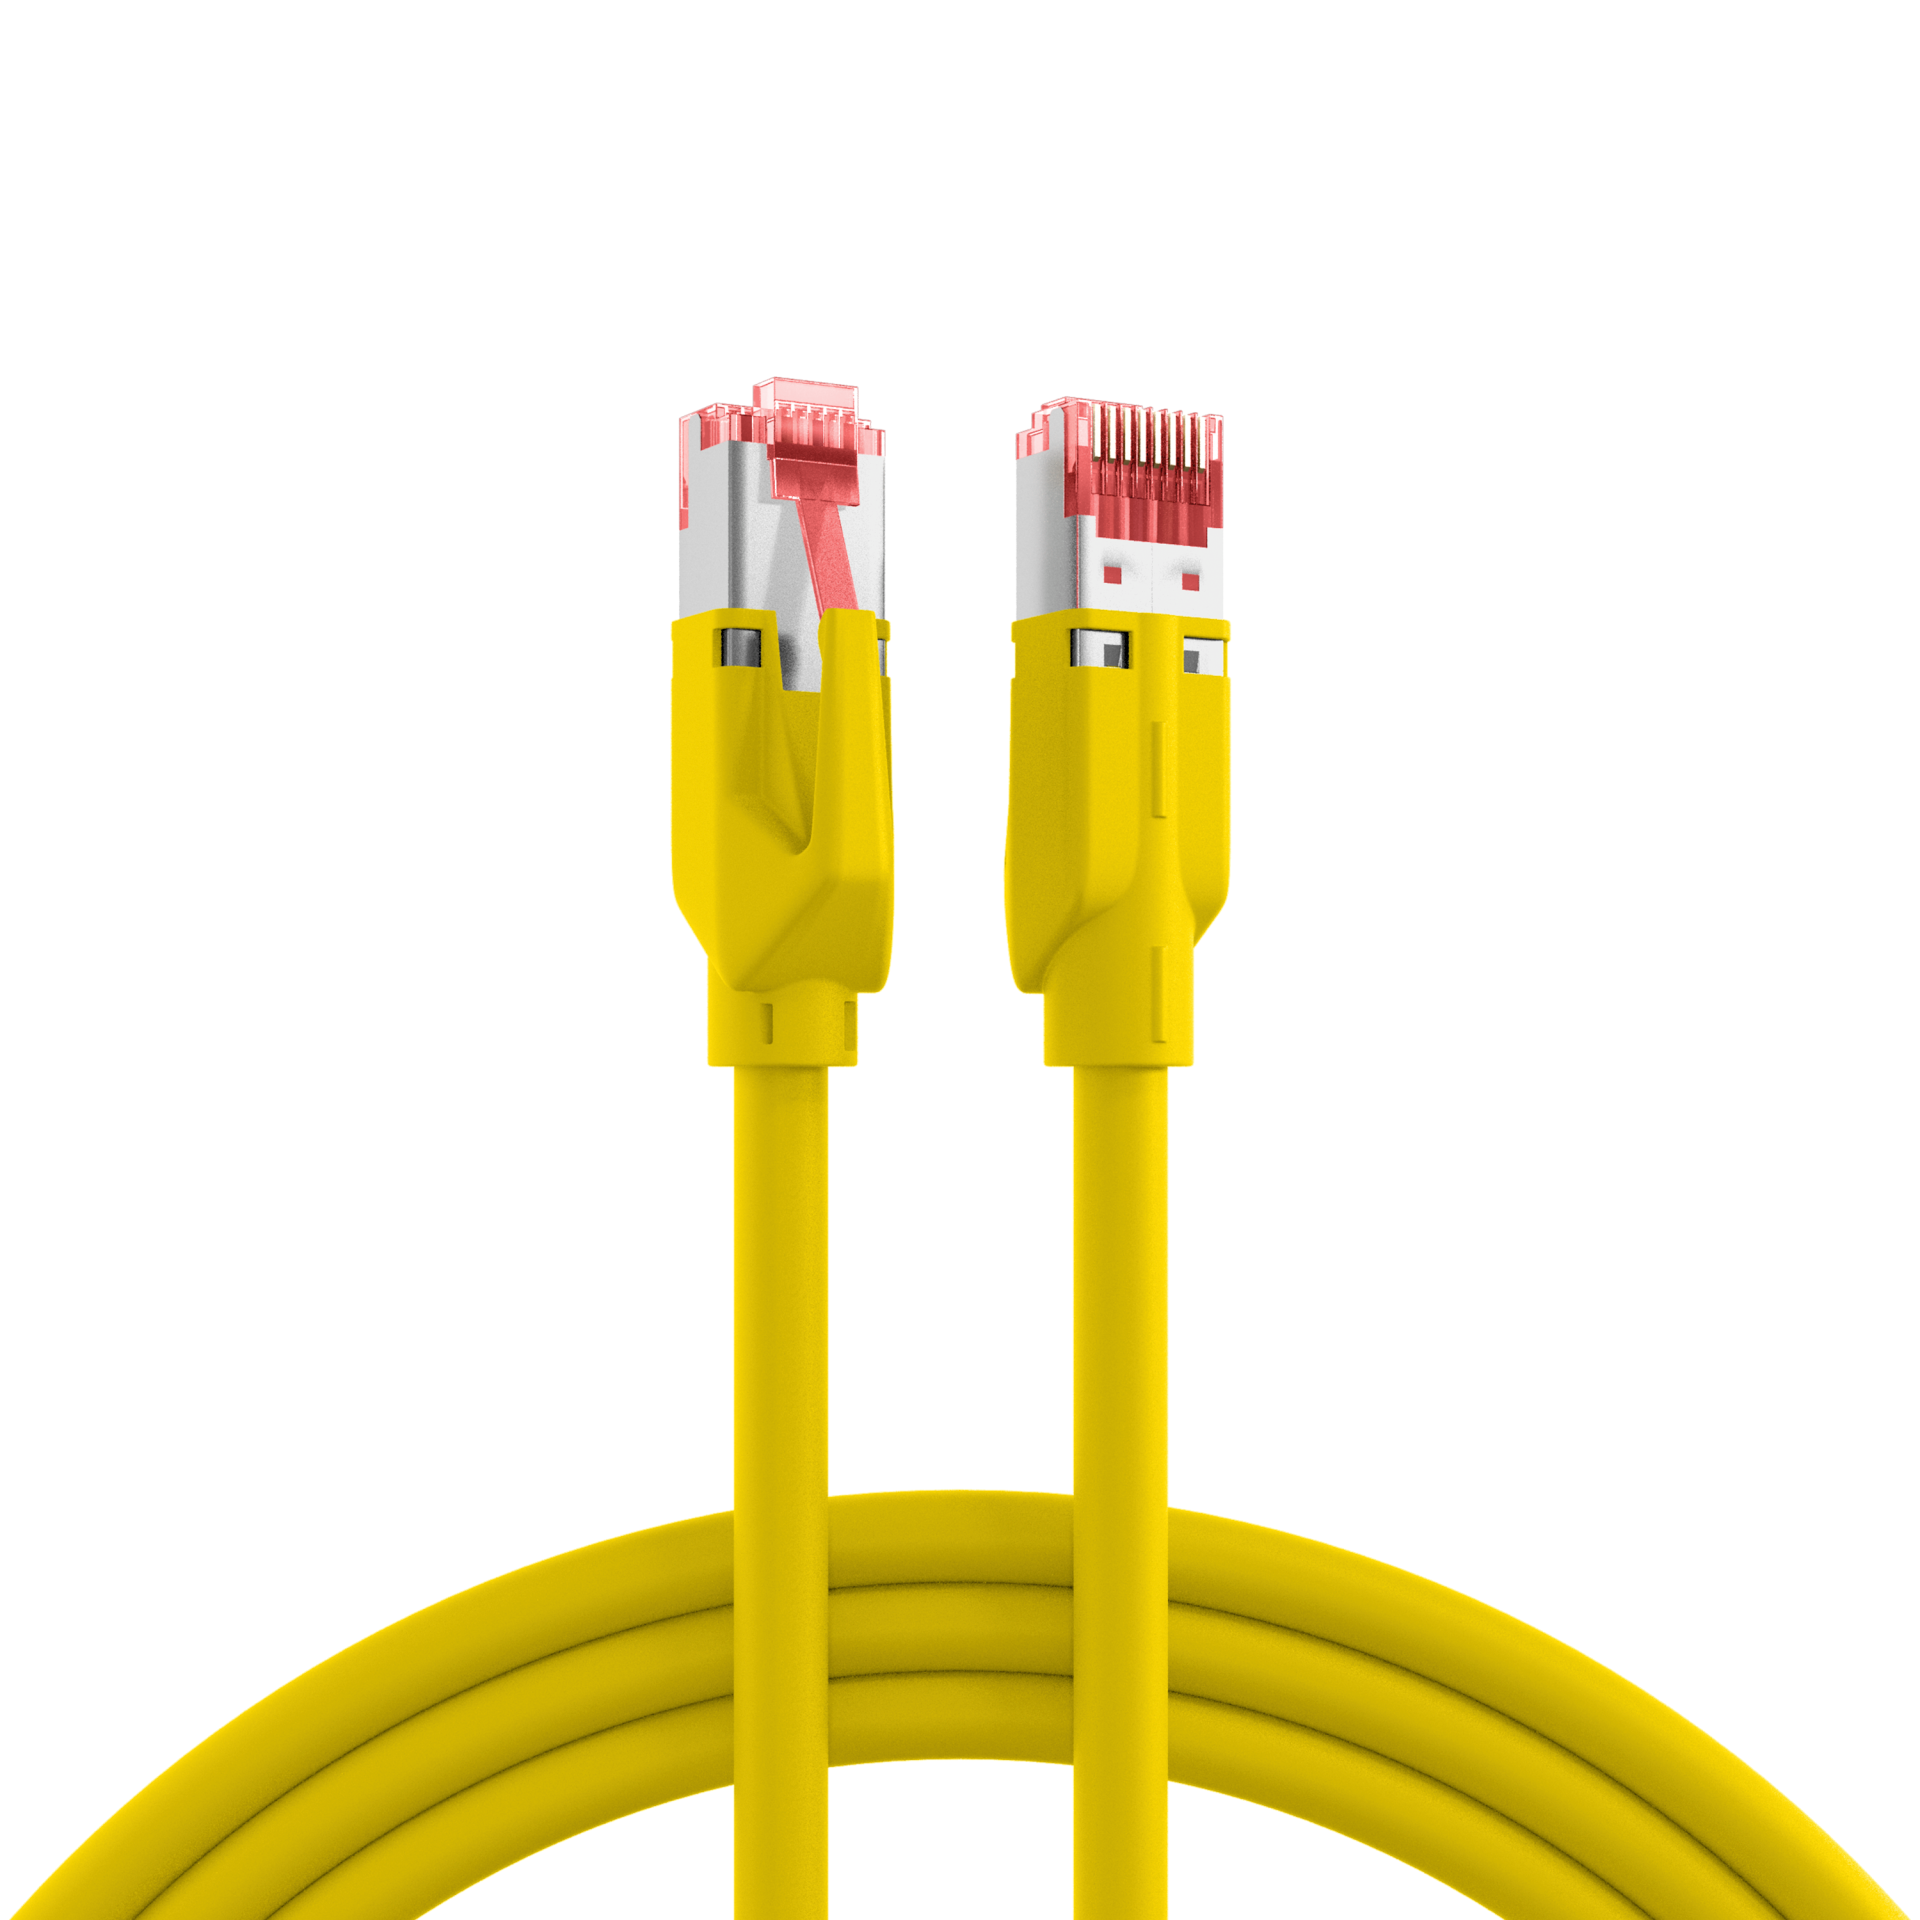 RJ45 Patch Cord Cat.5e SF/UTP PURTM21 for drag chains yellow 11m